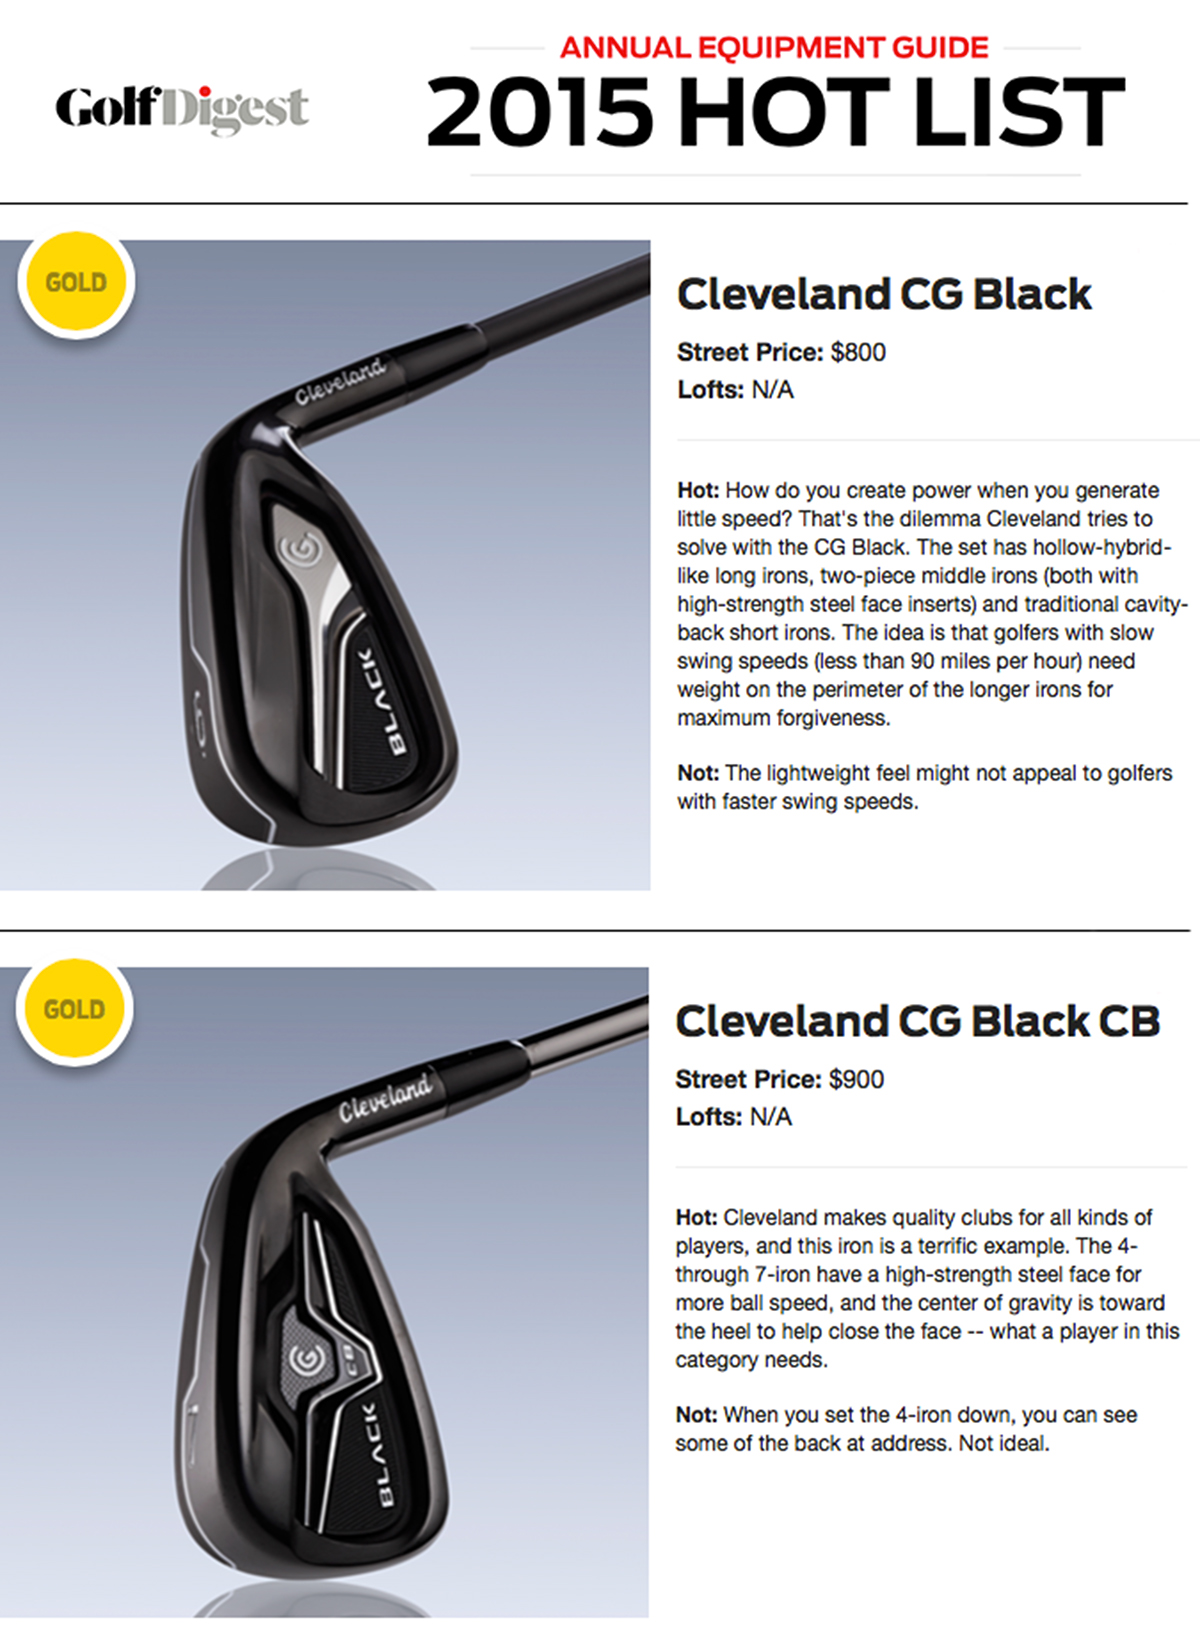 golf Cleveland Golf Irons black rich design target consumer persona Consumer Products sporting goods